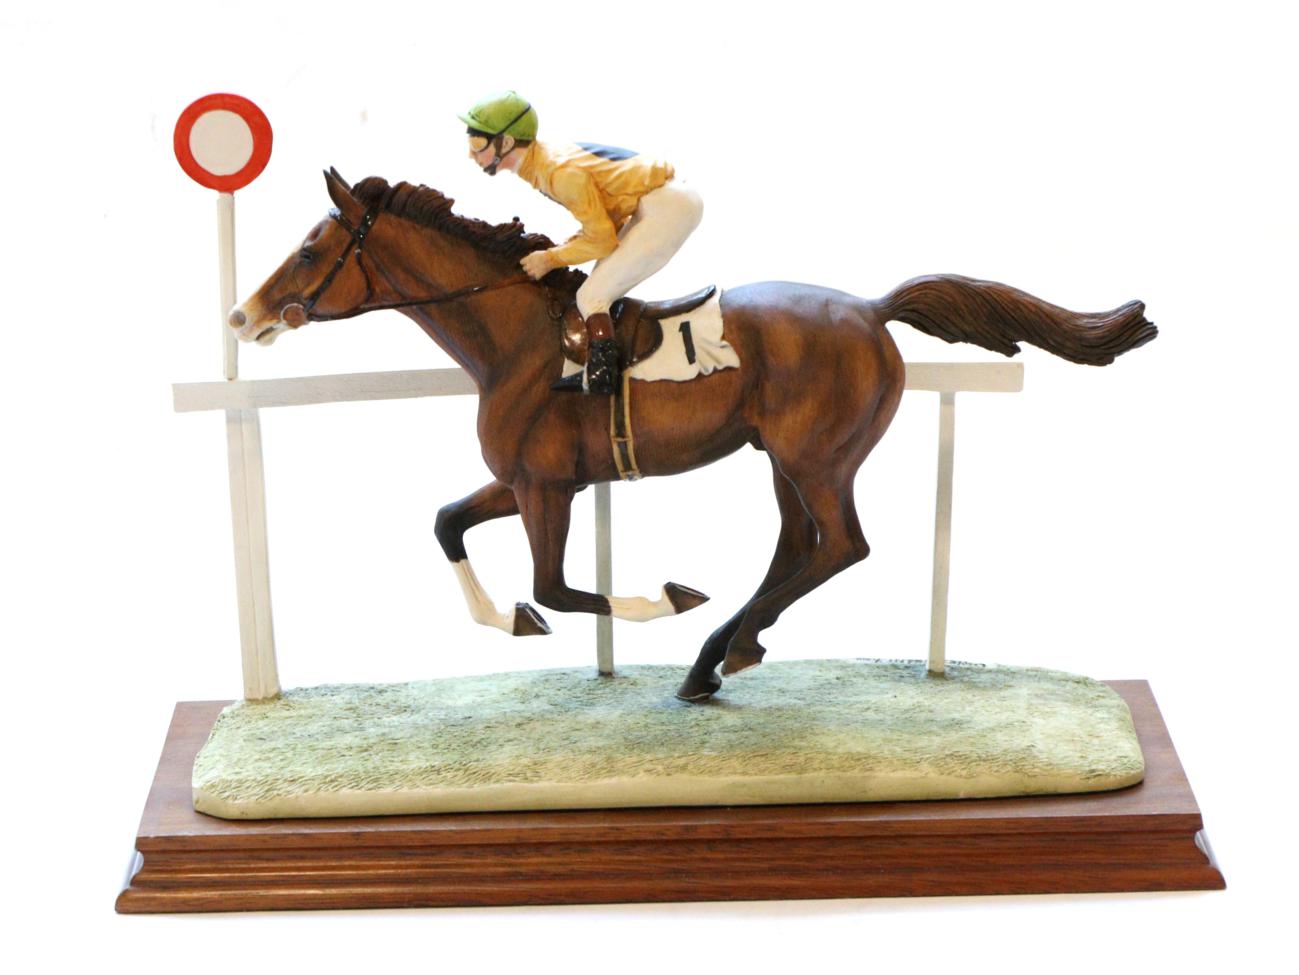 Border Fine Arts 'The Finish', model No. L52 by David Geenty, on wood base. This model was